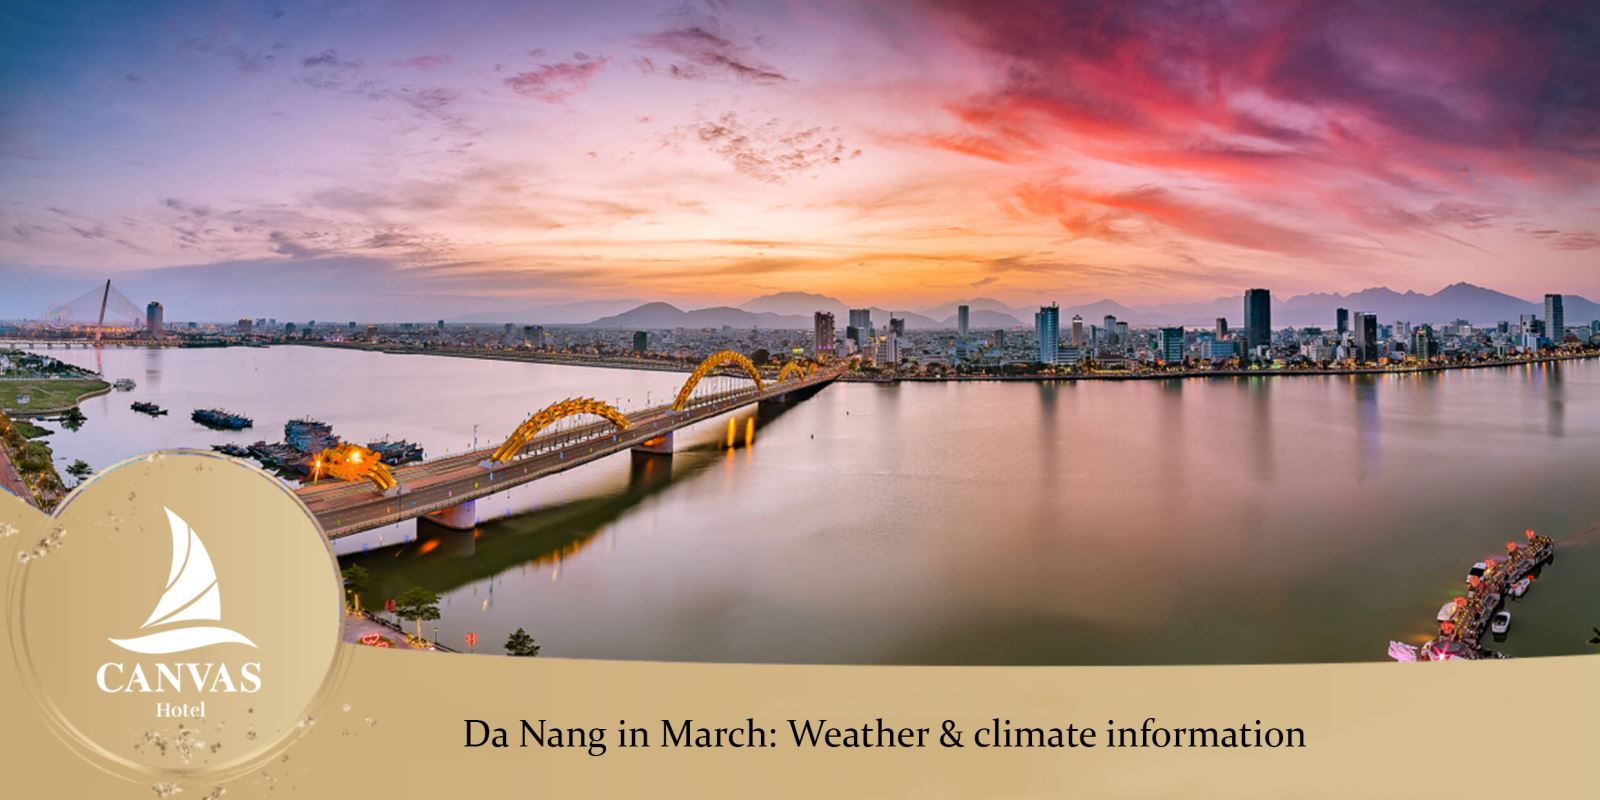 Da Nang in March: Weather & climate information